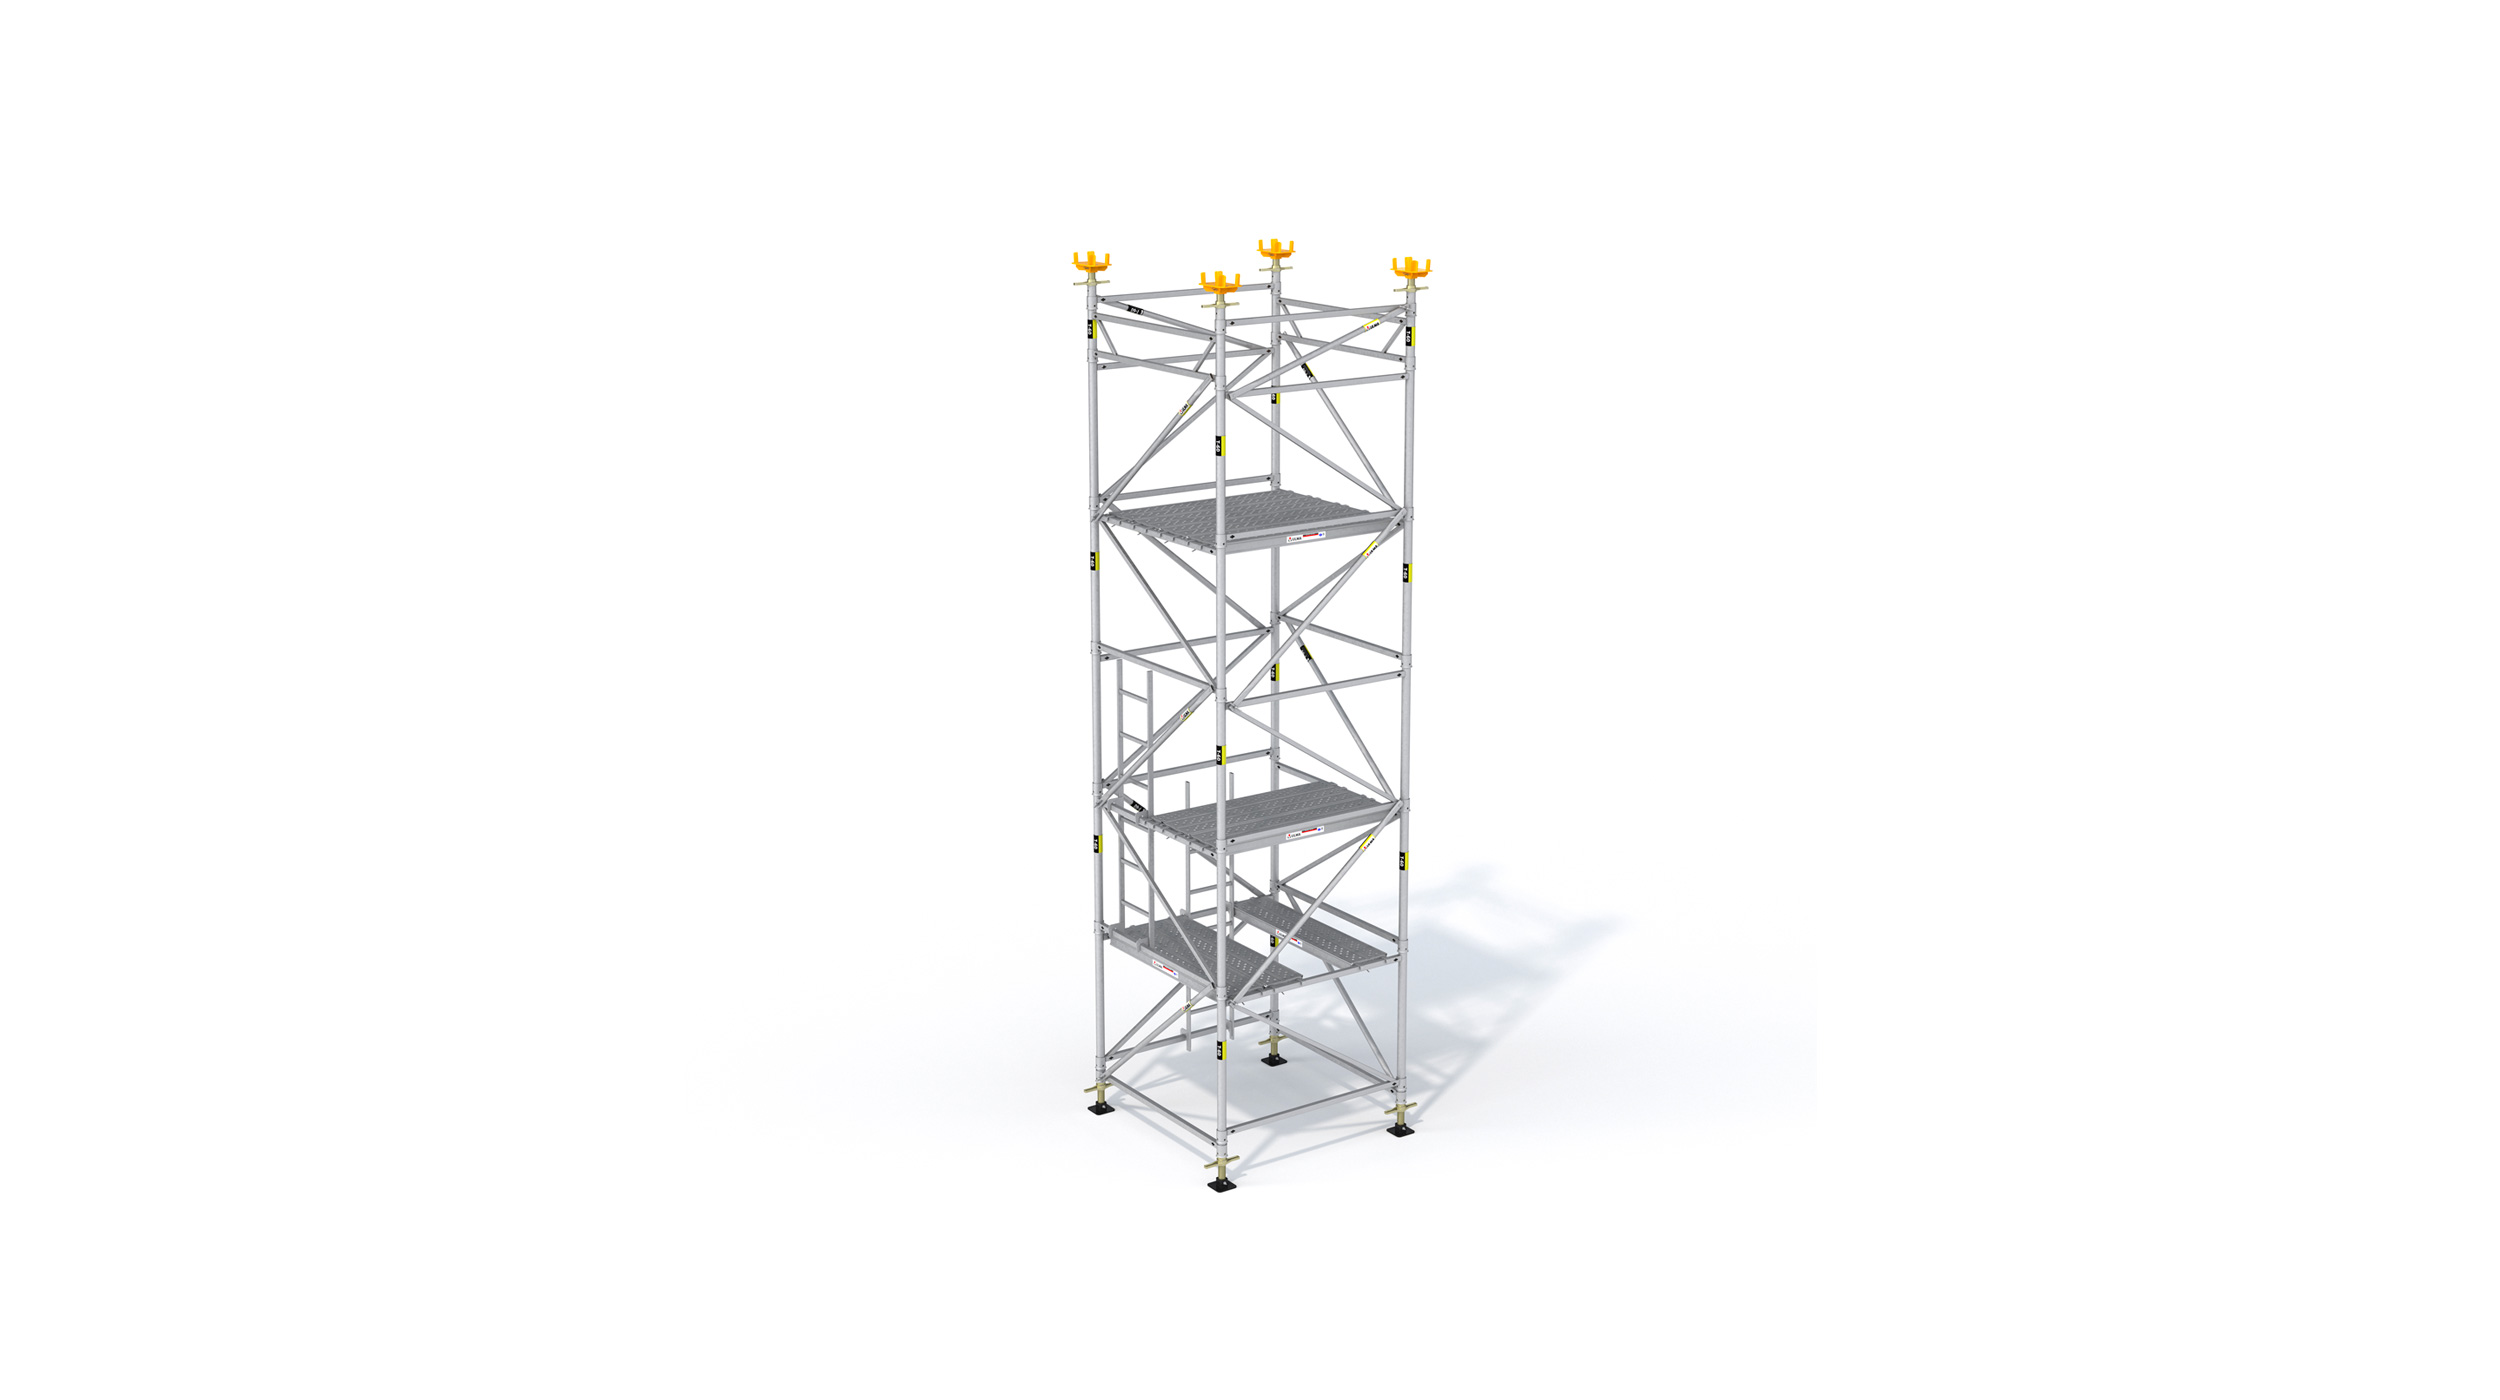 Cost-effective shoring tower specially oriented for bridge construction and specific applications in industrial and building constructions.